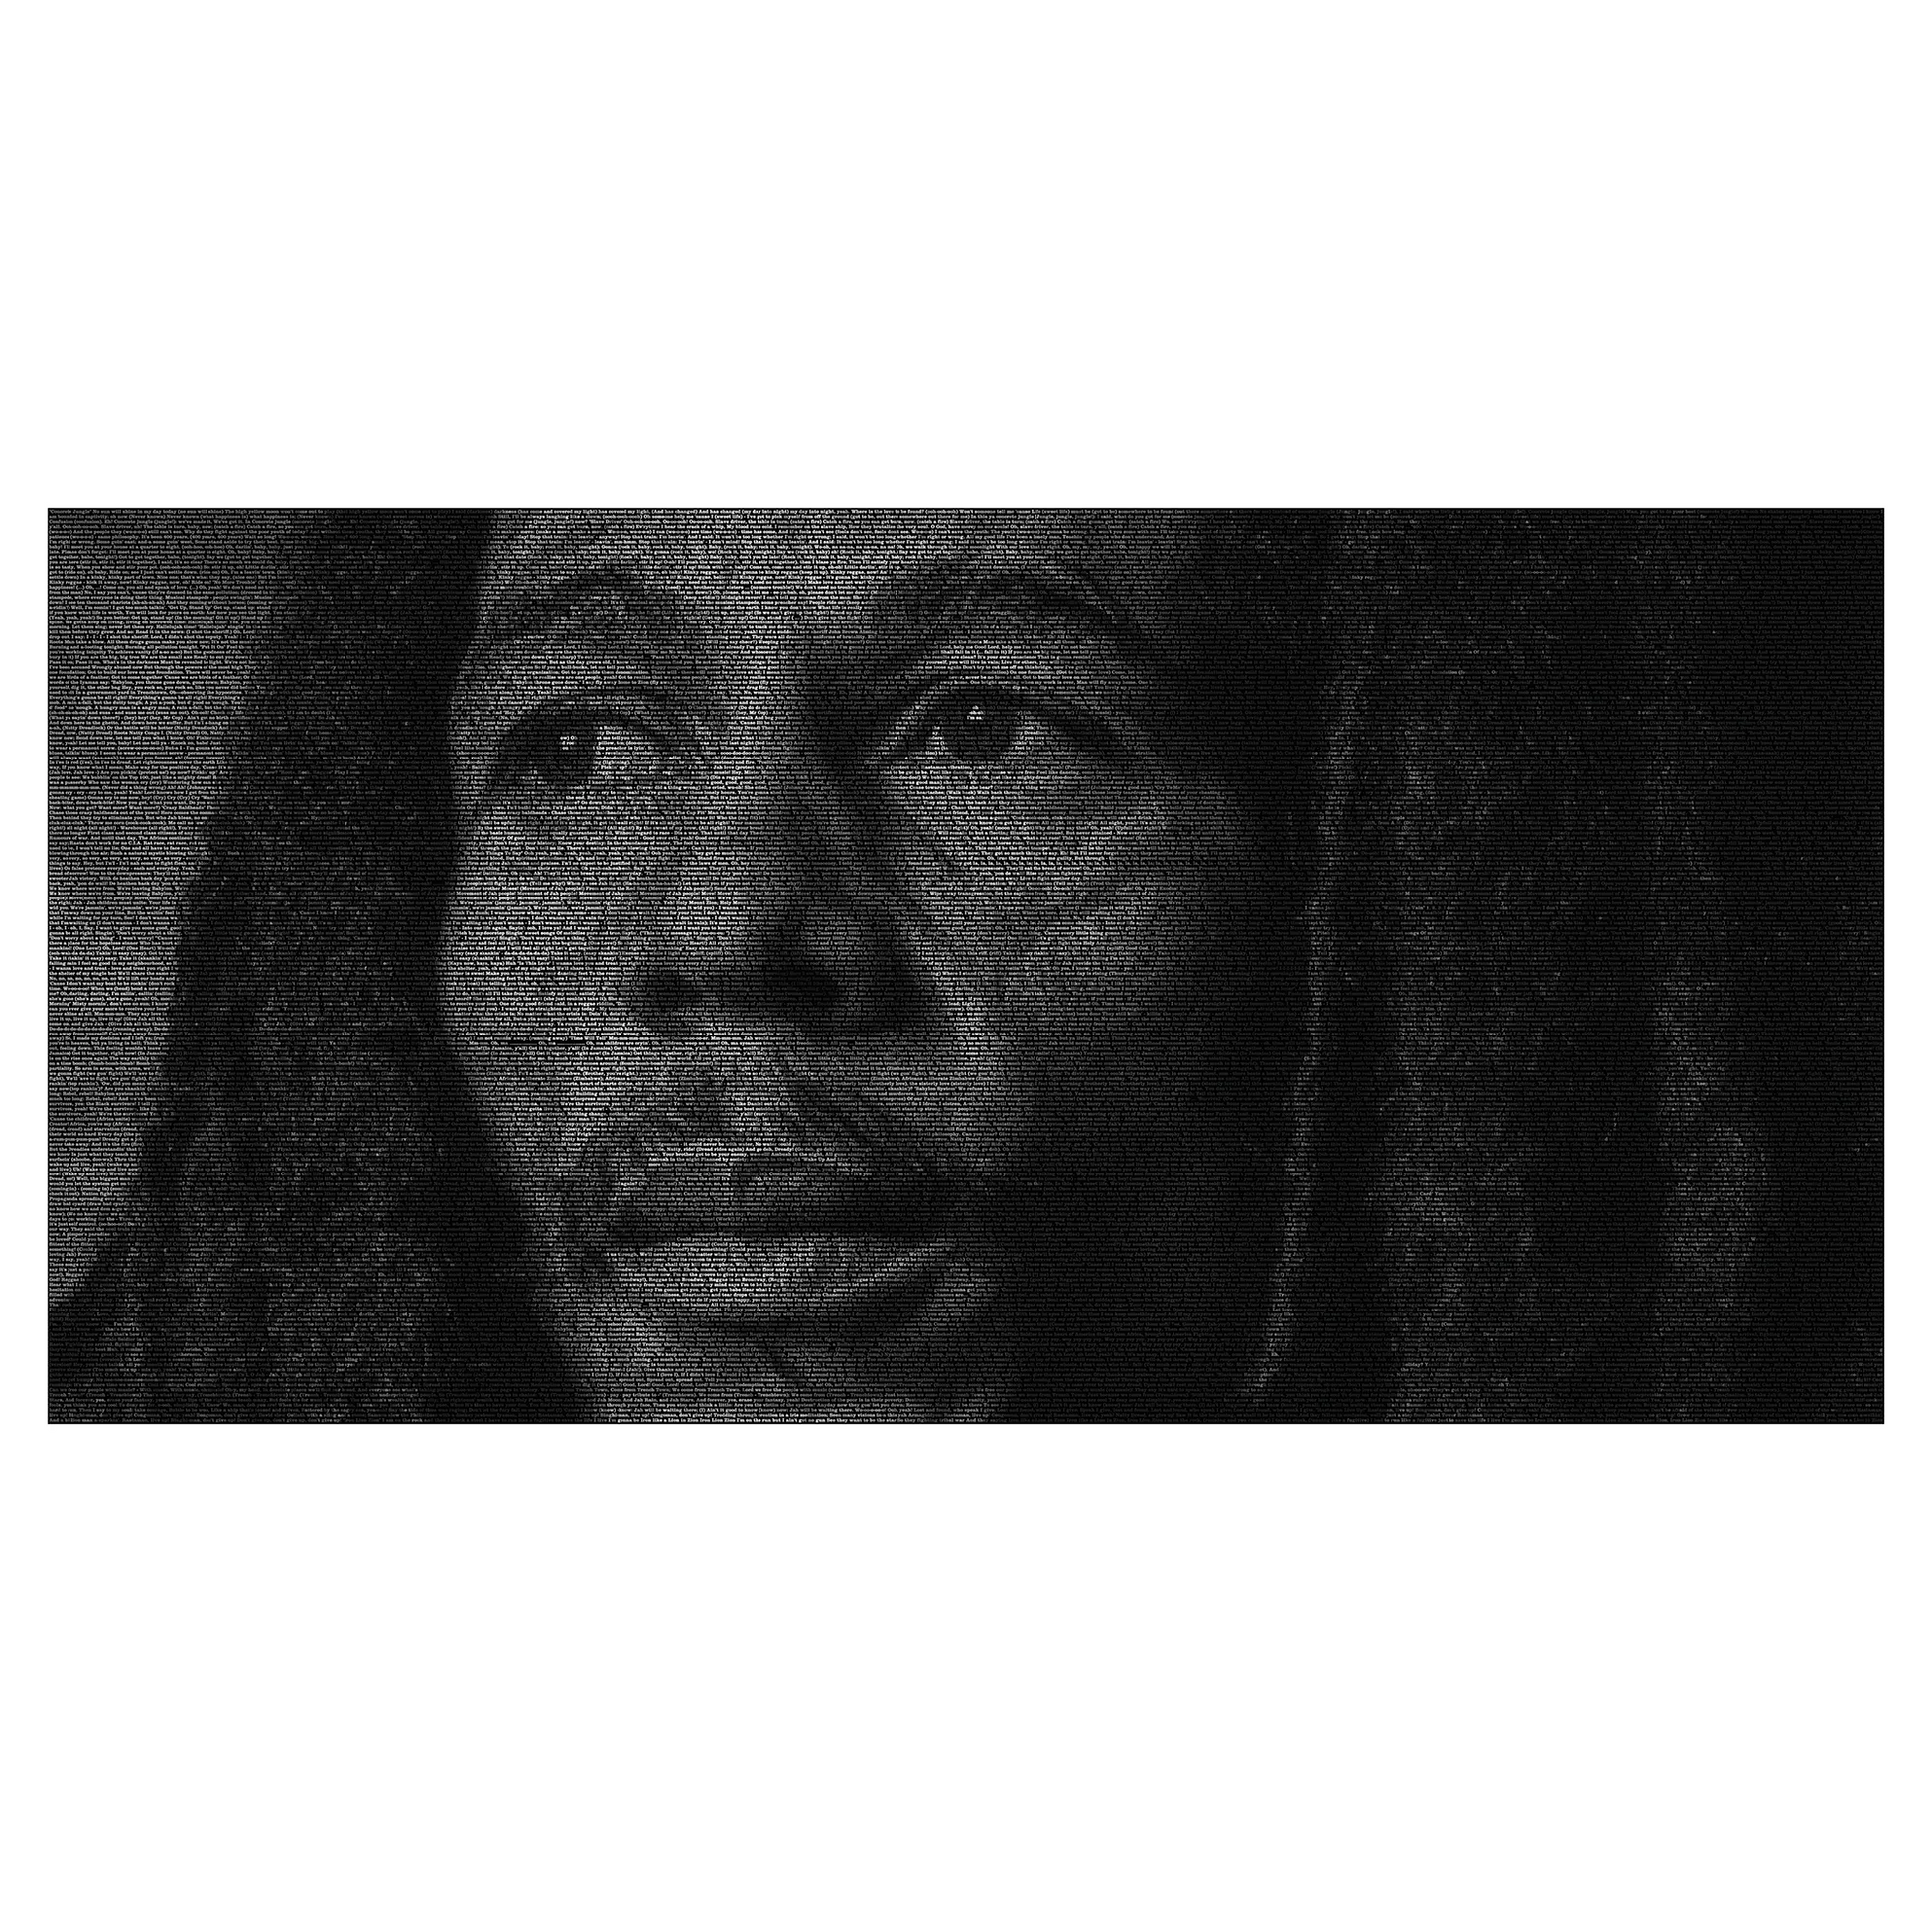 A black and white typographic portrait of Bob Marley, created from his song lyrics.